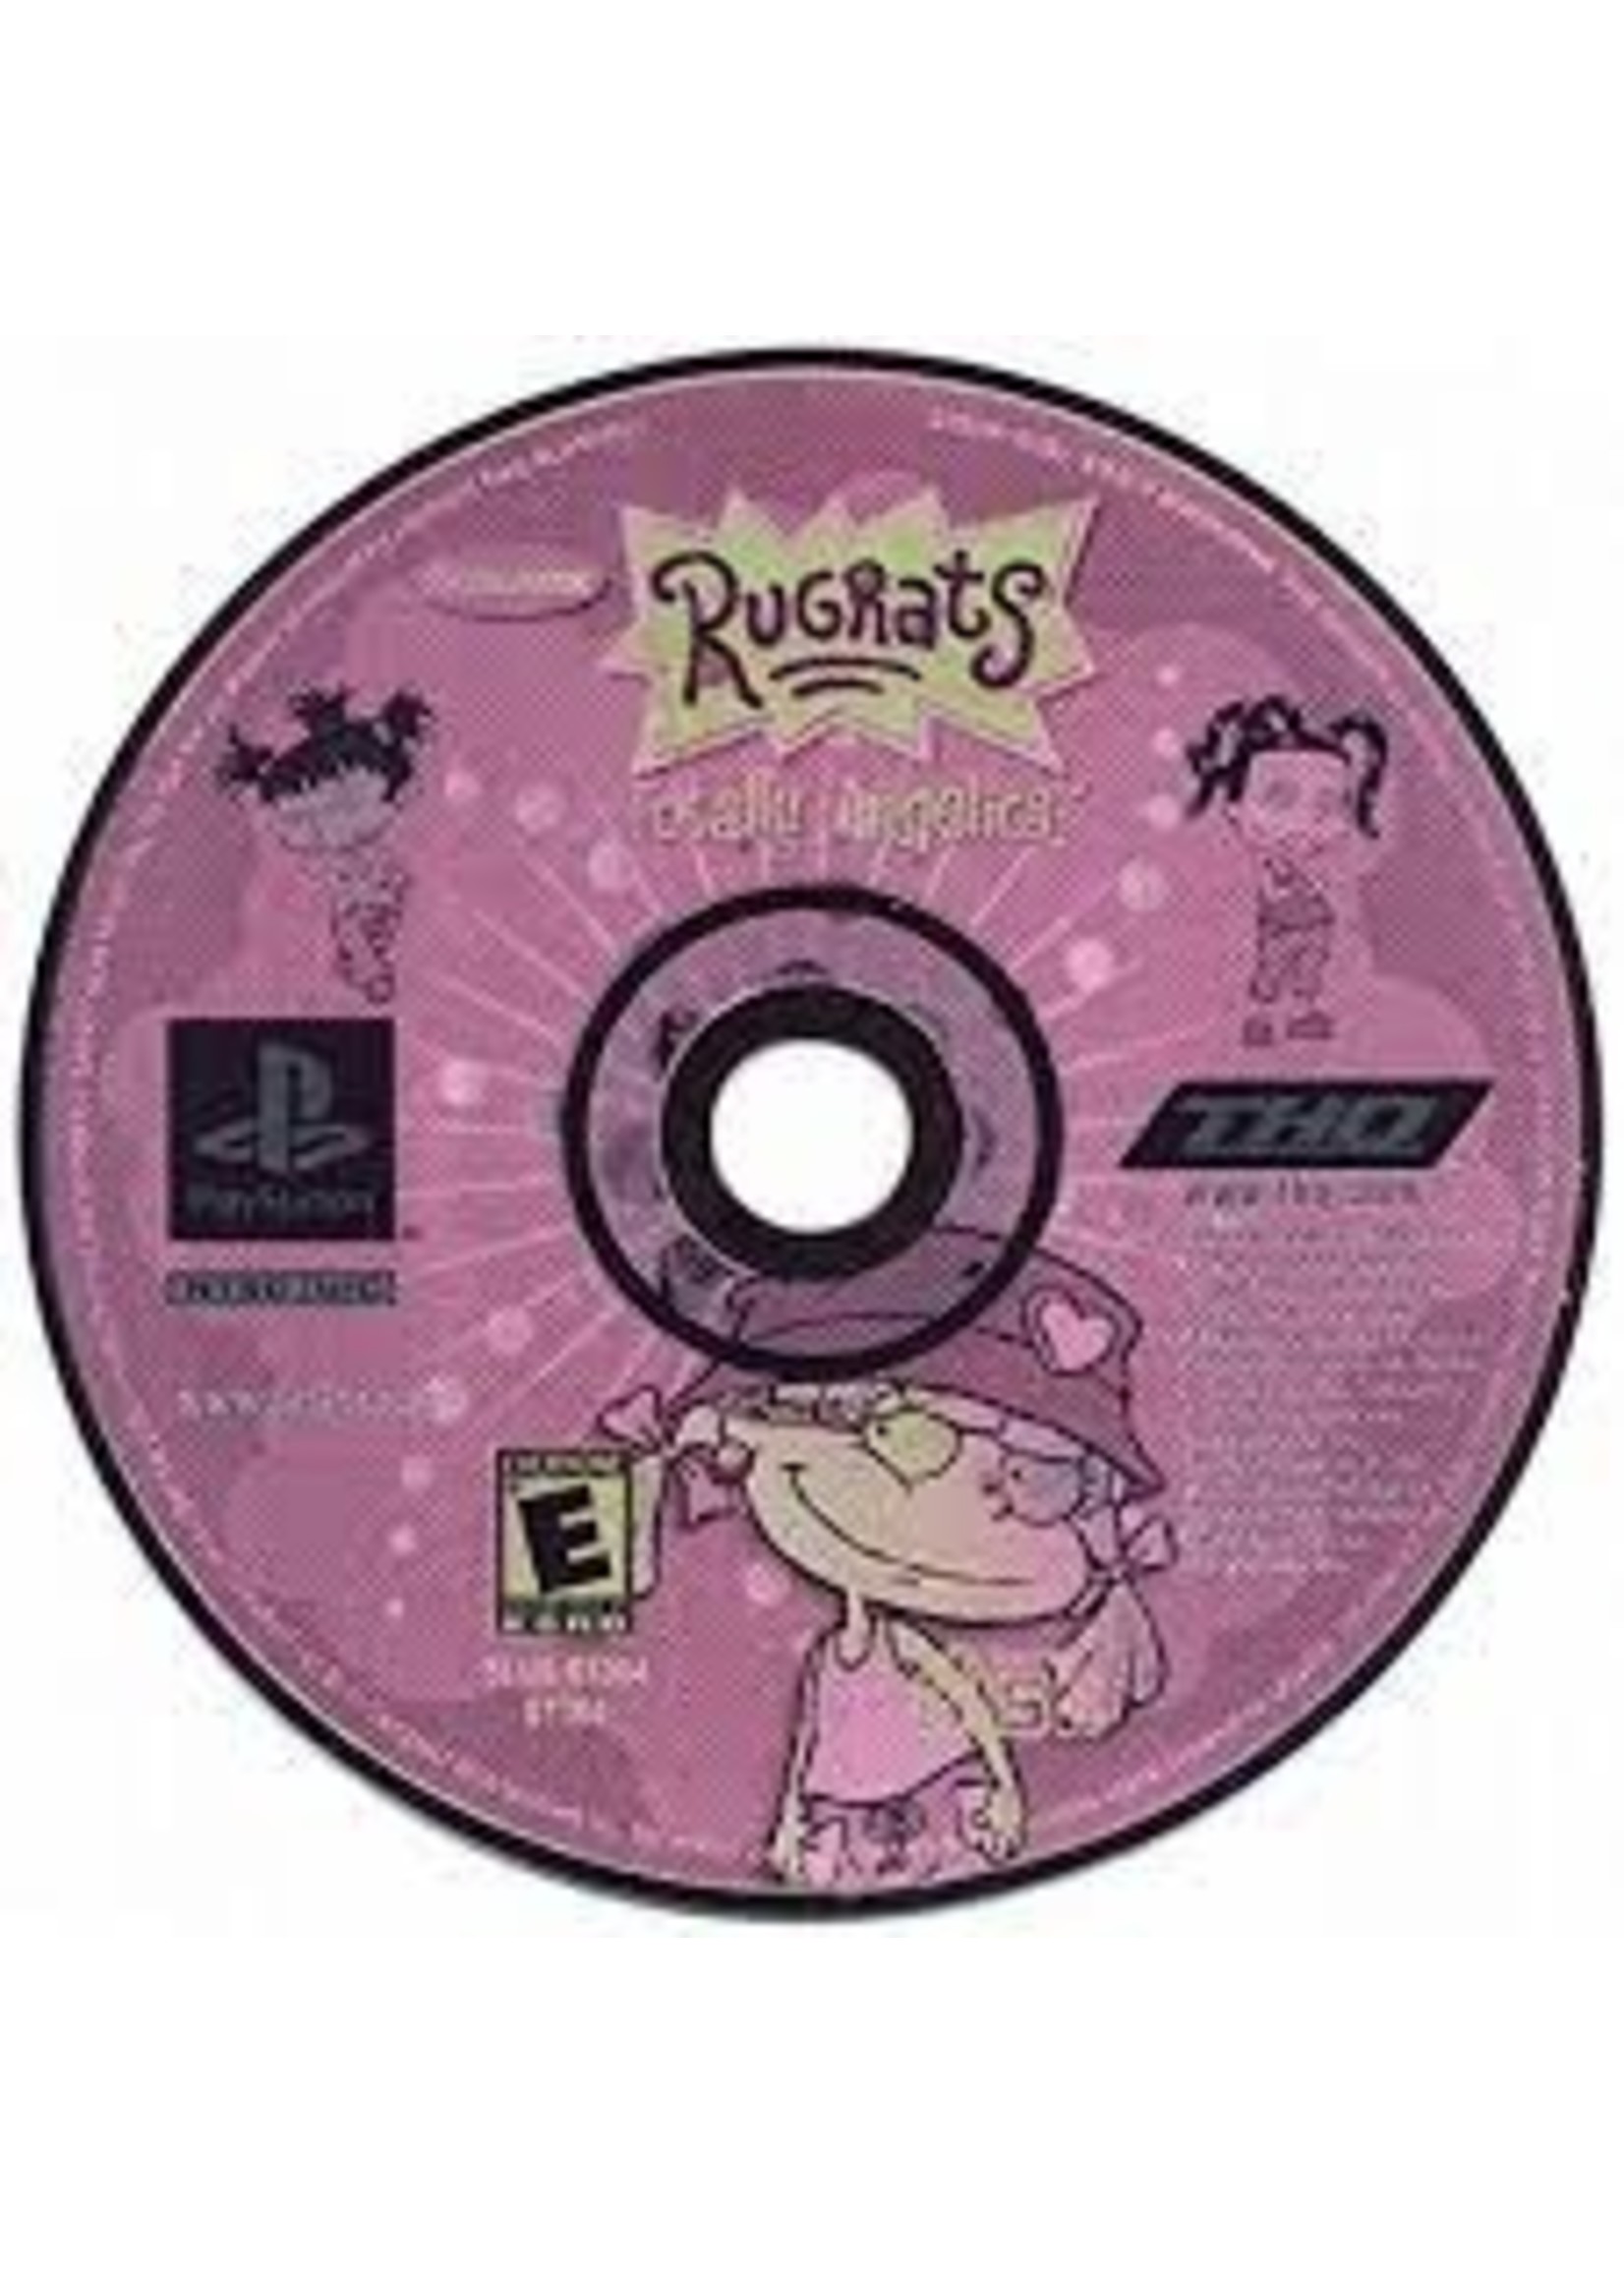 Sony Playstation 1 (PS1) Rugrats Totally Angelica - Print